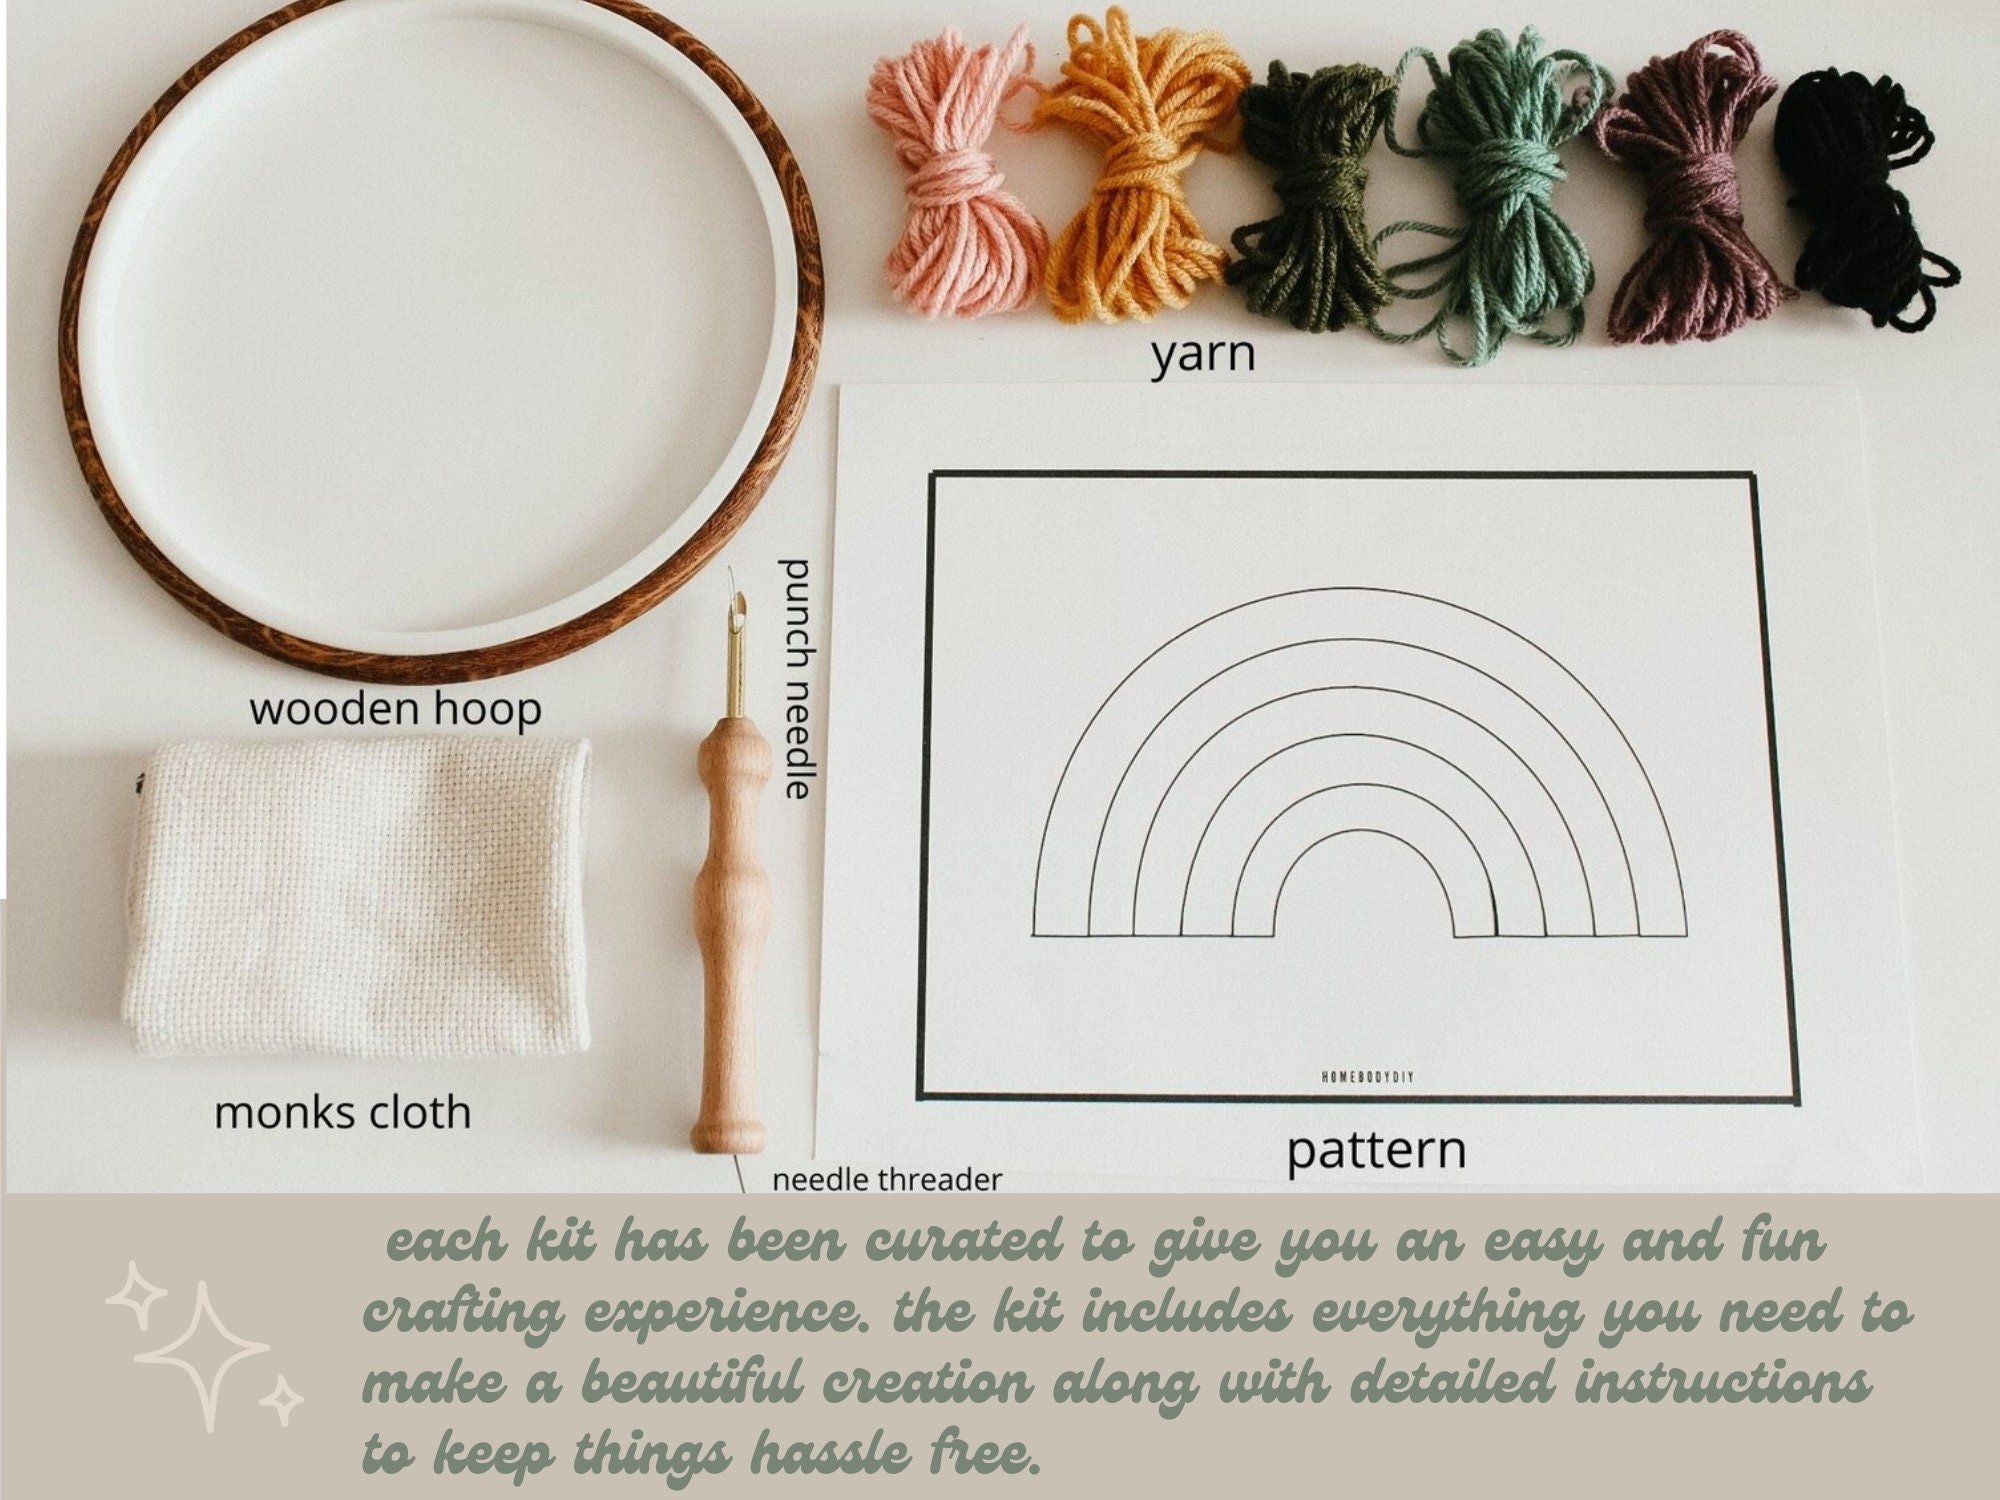 Punch needle kit for beginners including instructions